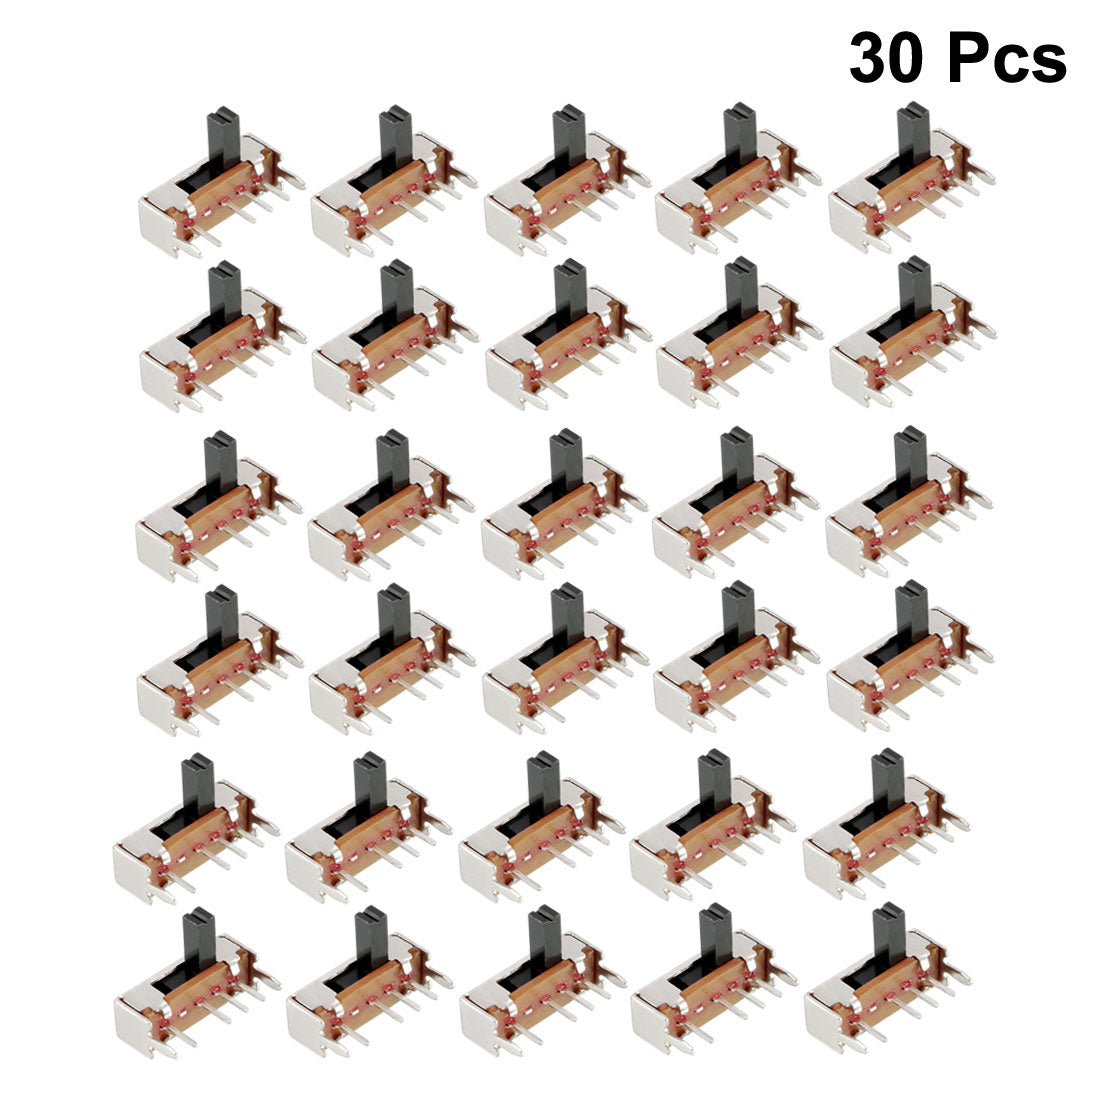 uxcell Uxcell 30Pcs 6mm Horizontal Slide Switch SP3T 1P3T 4 Terminals PCB Panel Latching